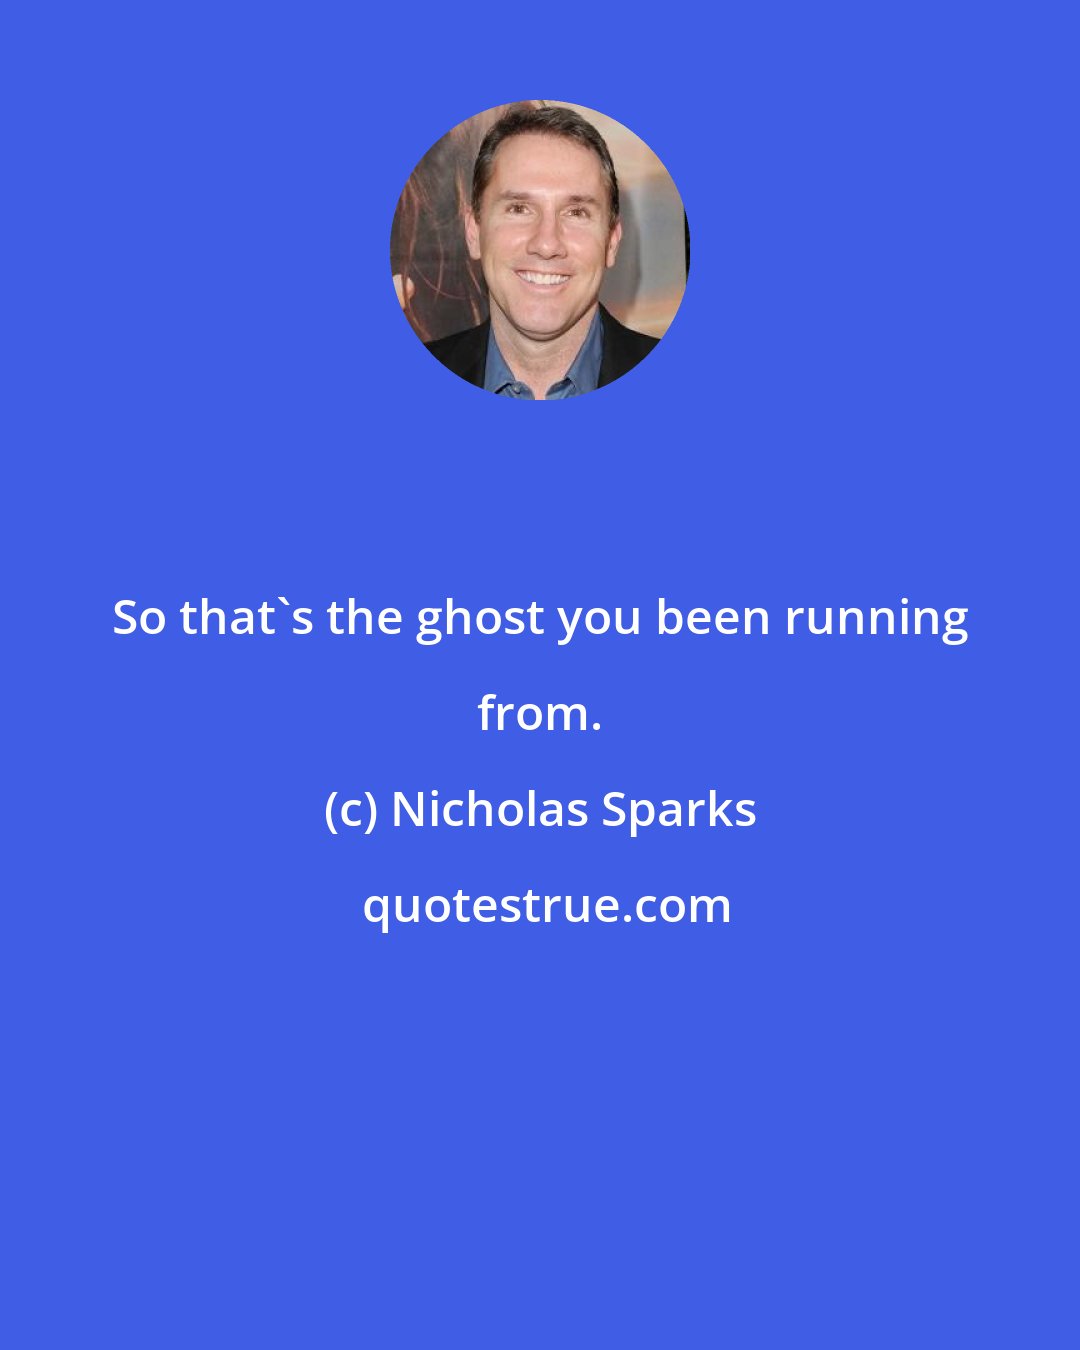 Nicholas Sparks: So that's the ghost you been running from.